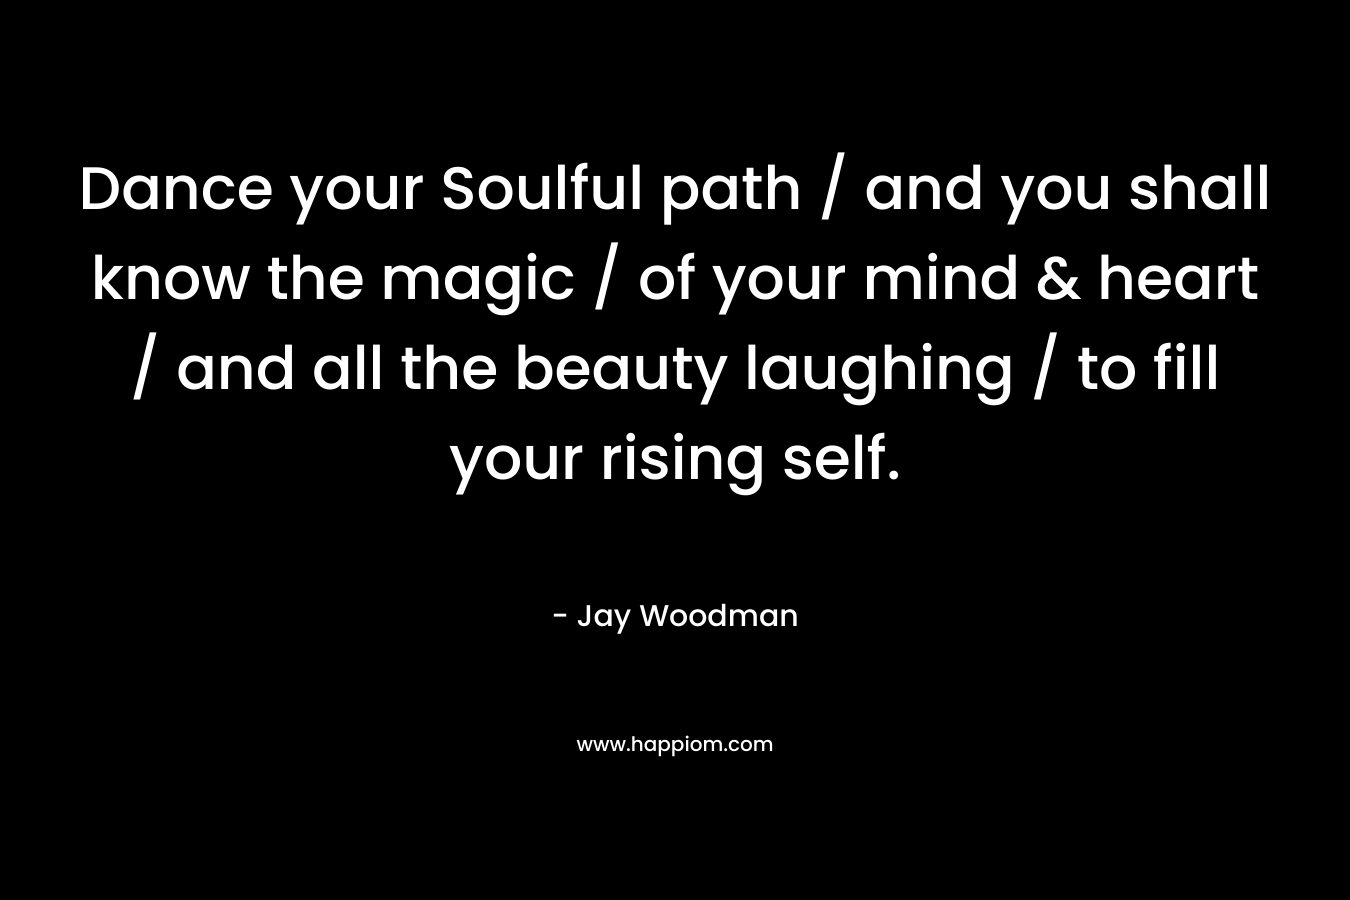 Dance your Soulful path / and you shall know the magic / of your mind & heart / and all the beauty laughing / to fill your rising self. – Jay Woodman